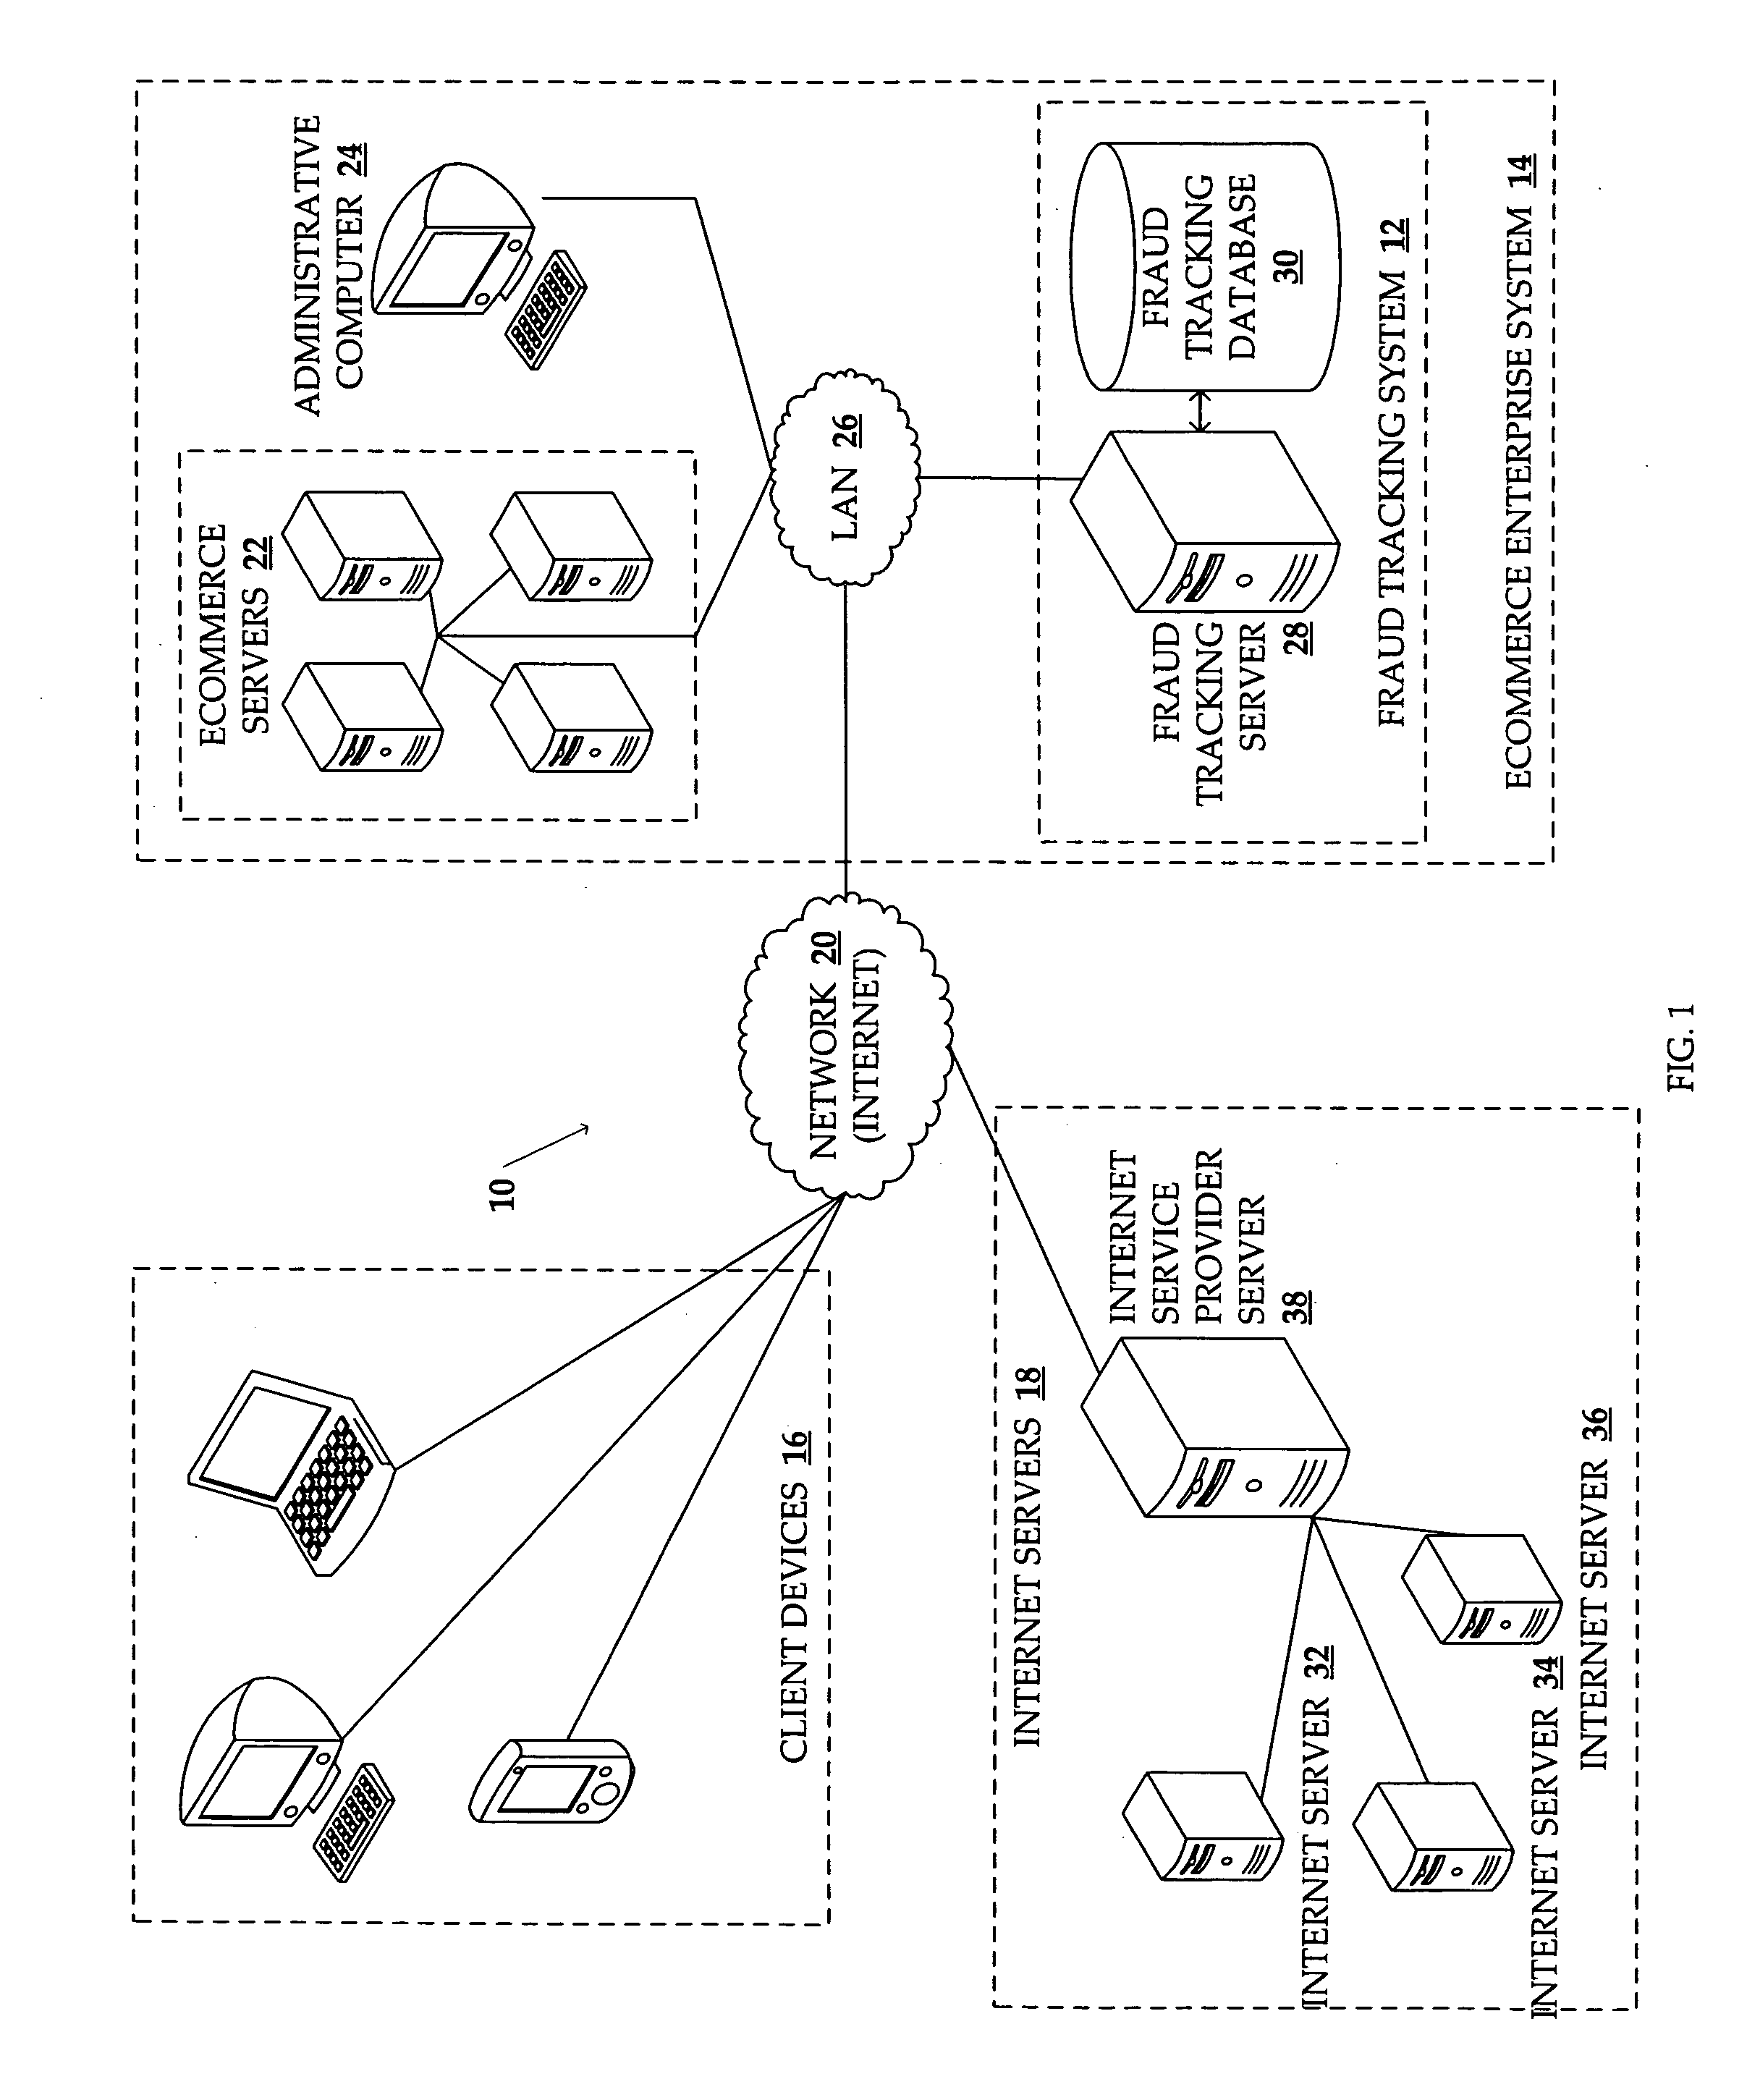 Method and system for tracking fraudulent activity